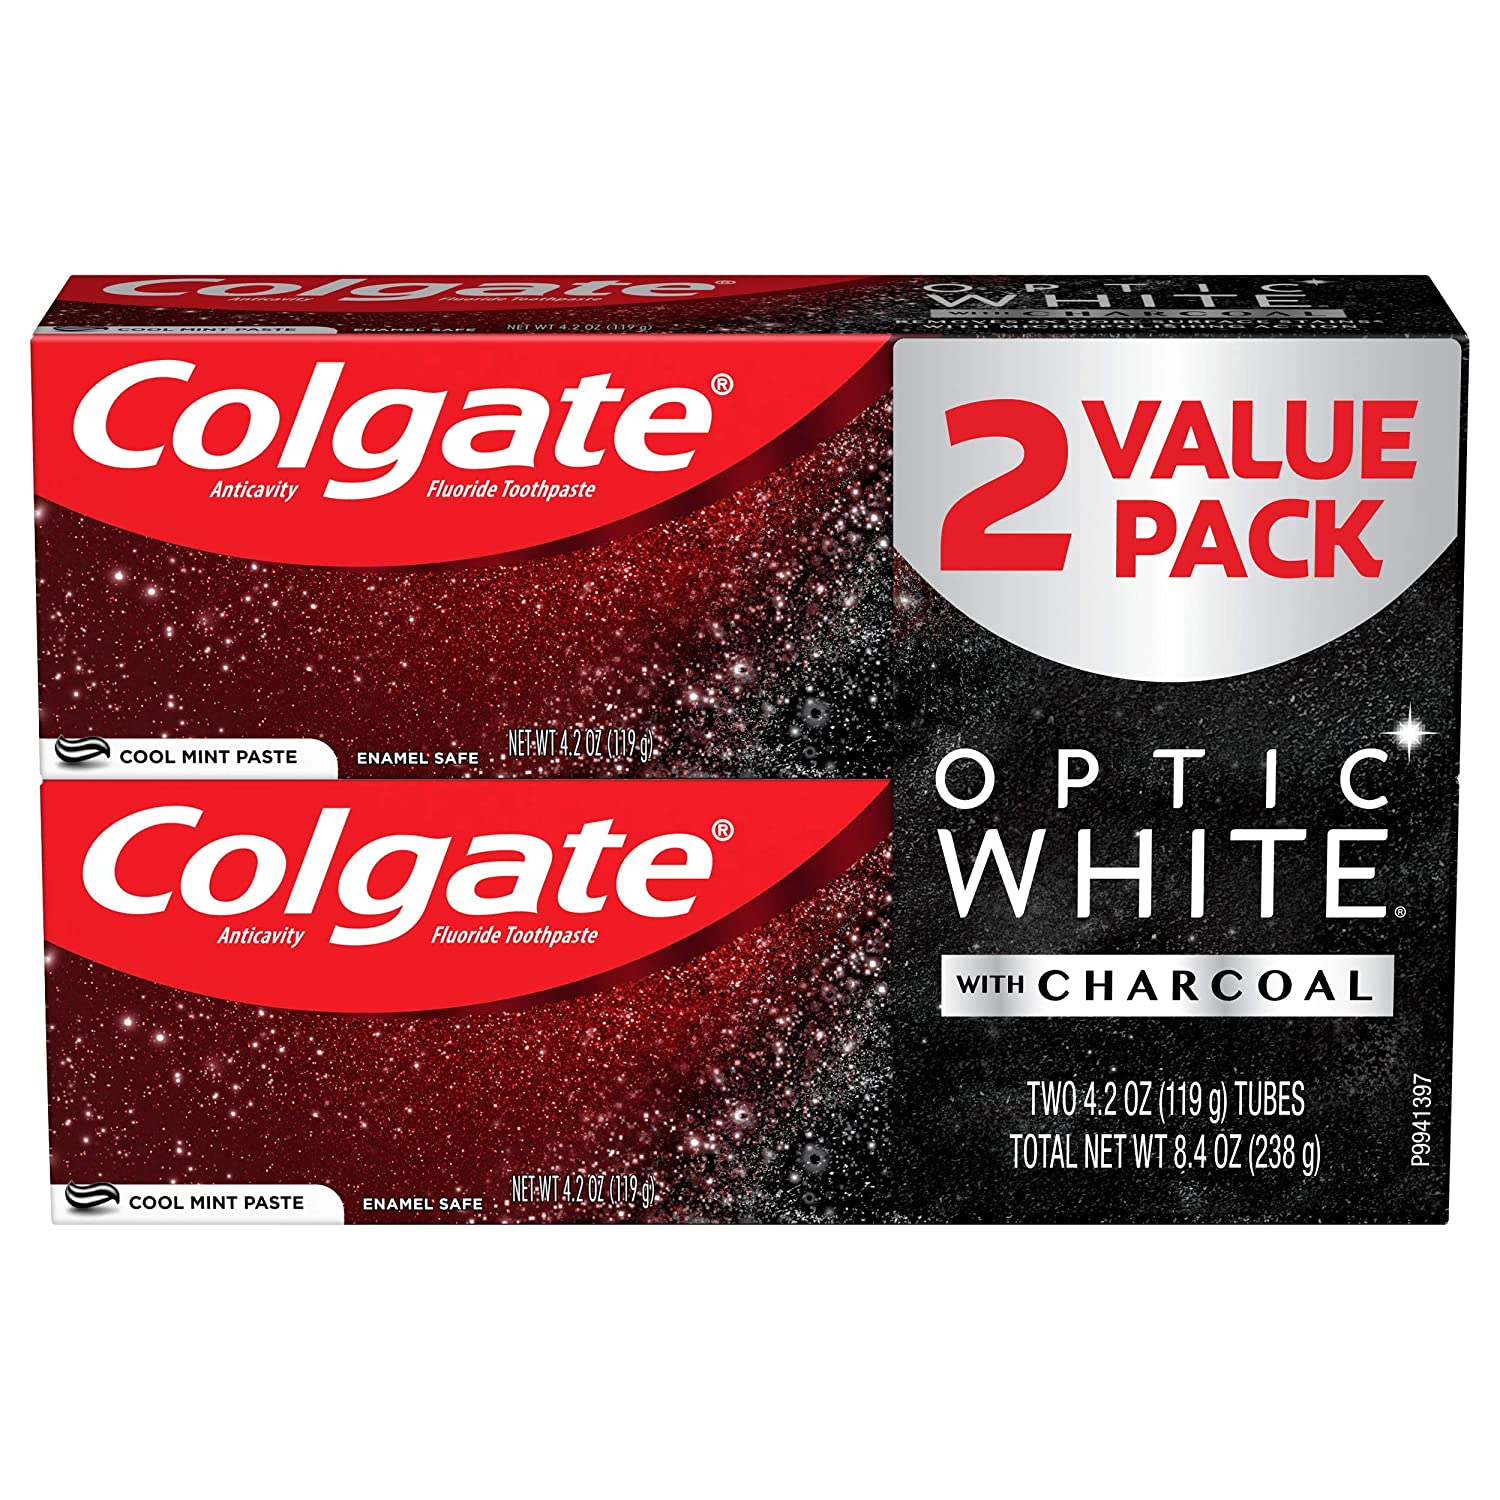 2-Pack 4.2-Oz Colgate Optic White Charcoal Toothpaste for Whitening Teeth w/ Fluoride (Cool Mint) $5.95 w/ S&S + Free Shipping w/ Amazon Prime or Orders $25+